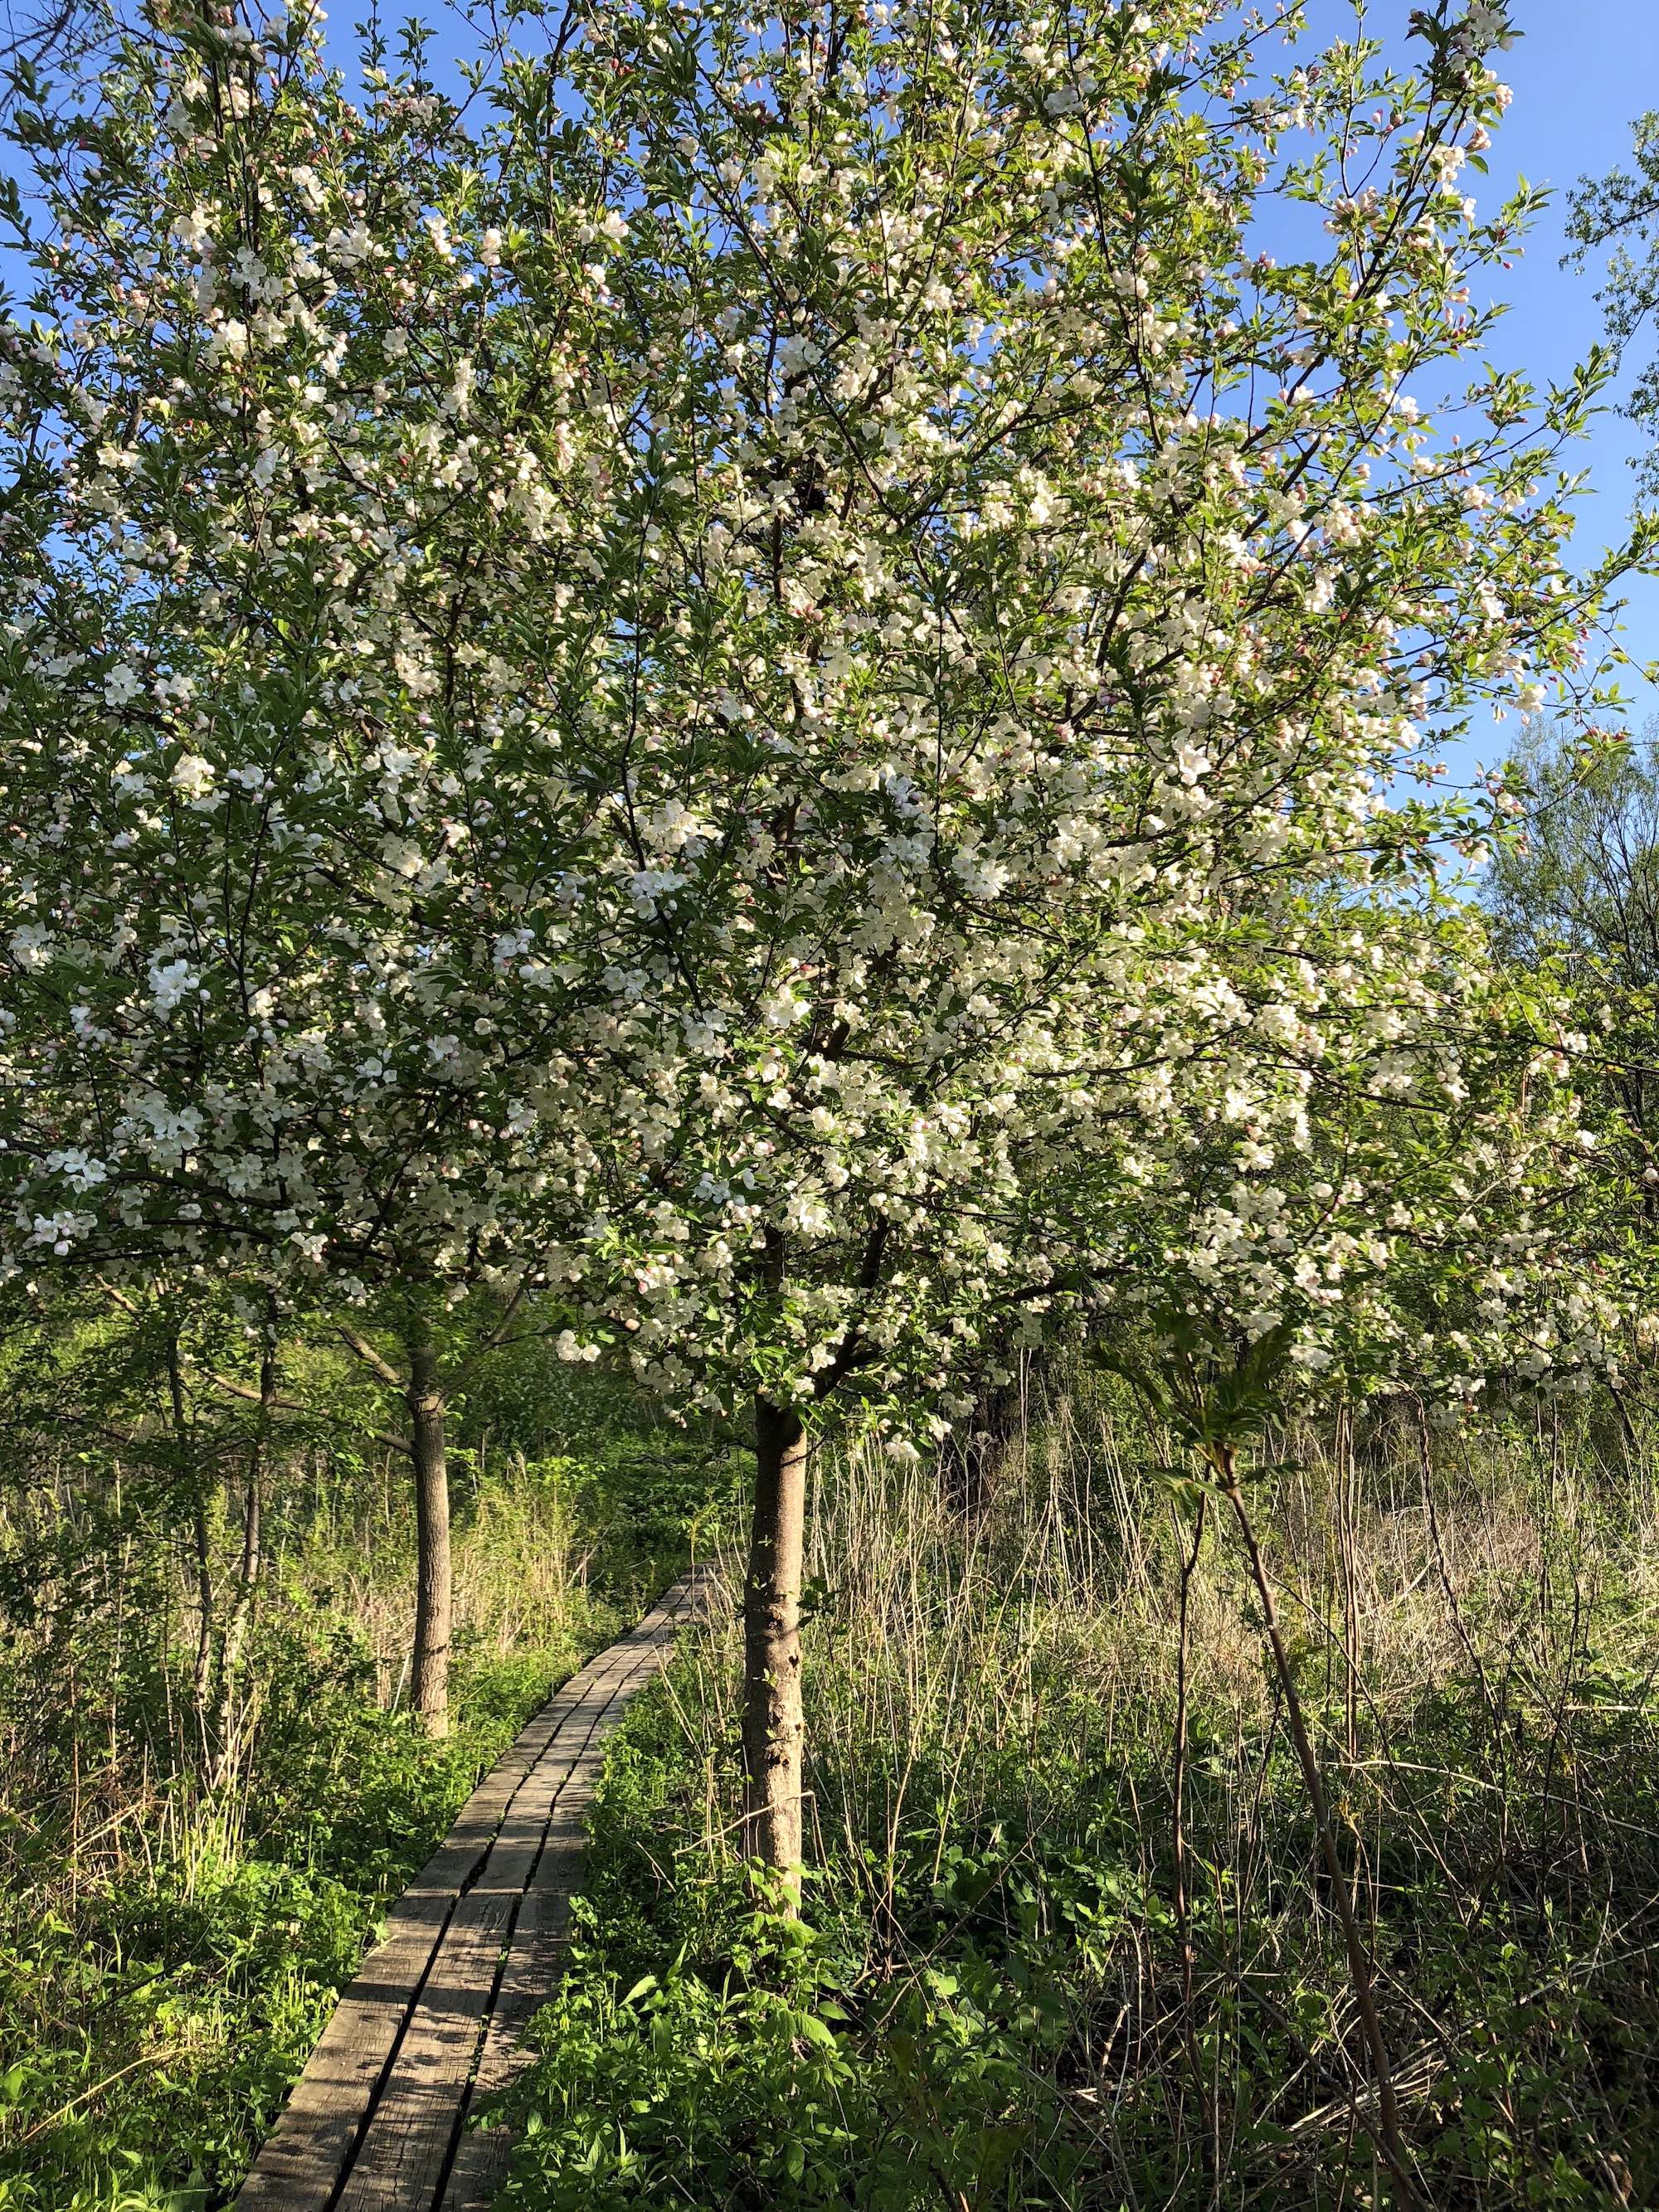 Crabapple blossoms along the Ho-Nee-Um boardwalk in the UW Arboretum on May 17, 2018.